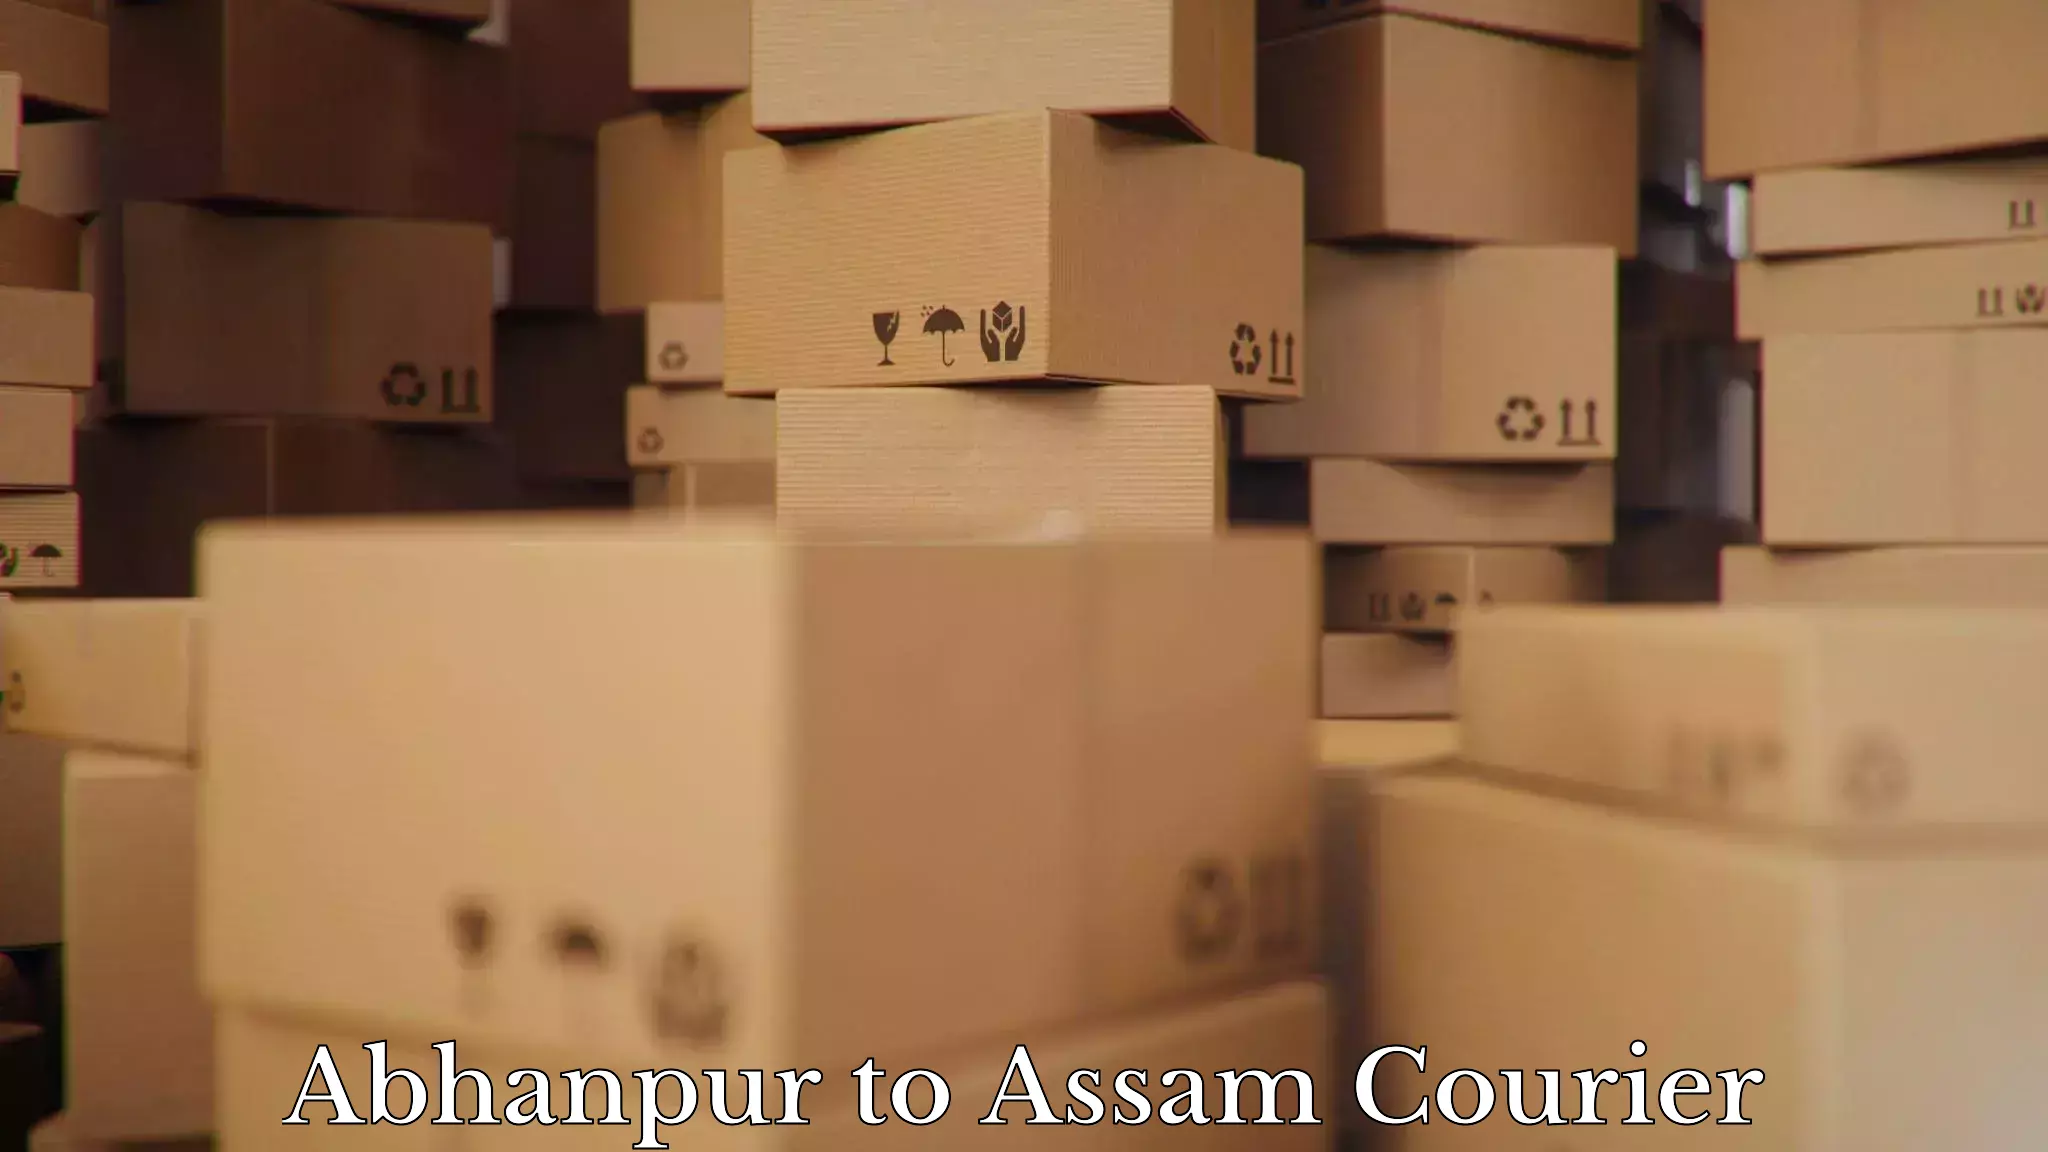 Reliable goods transport Abhanpur to Guwahati University